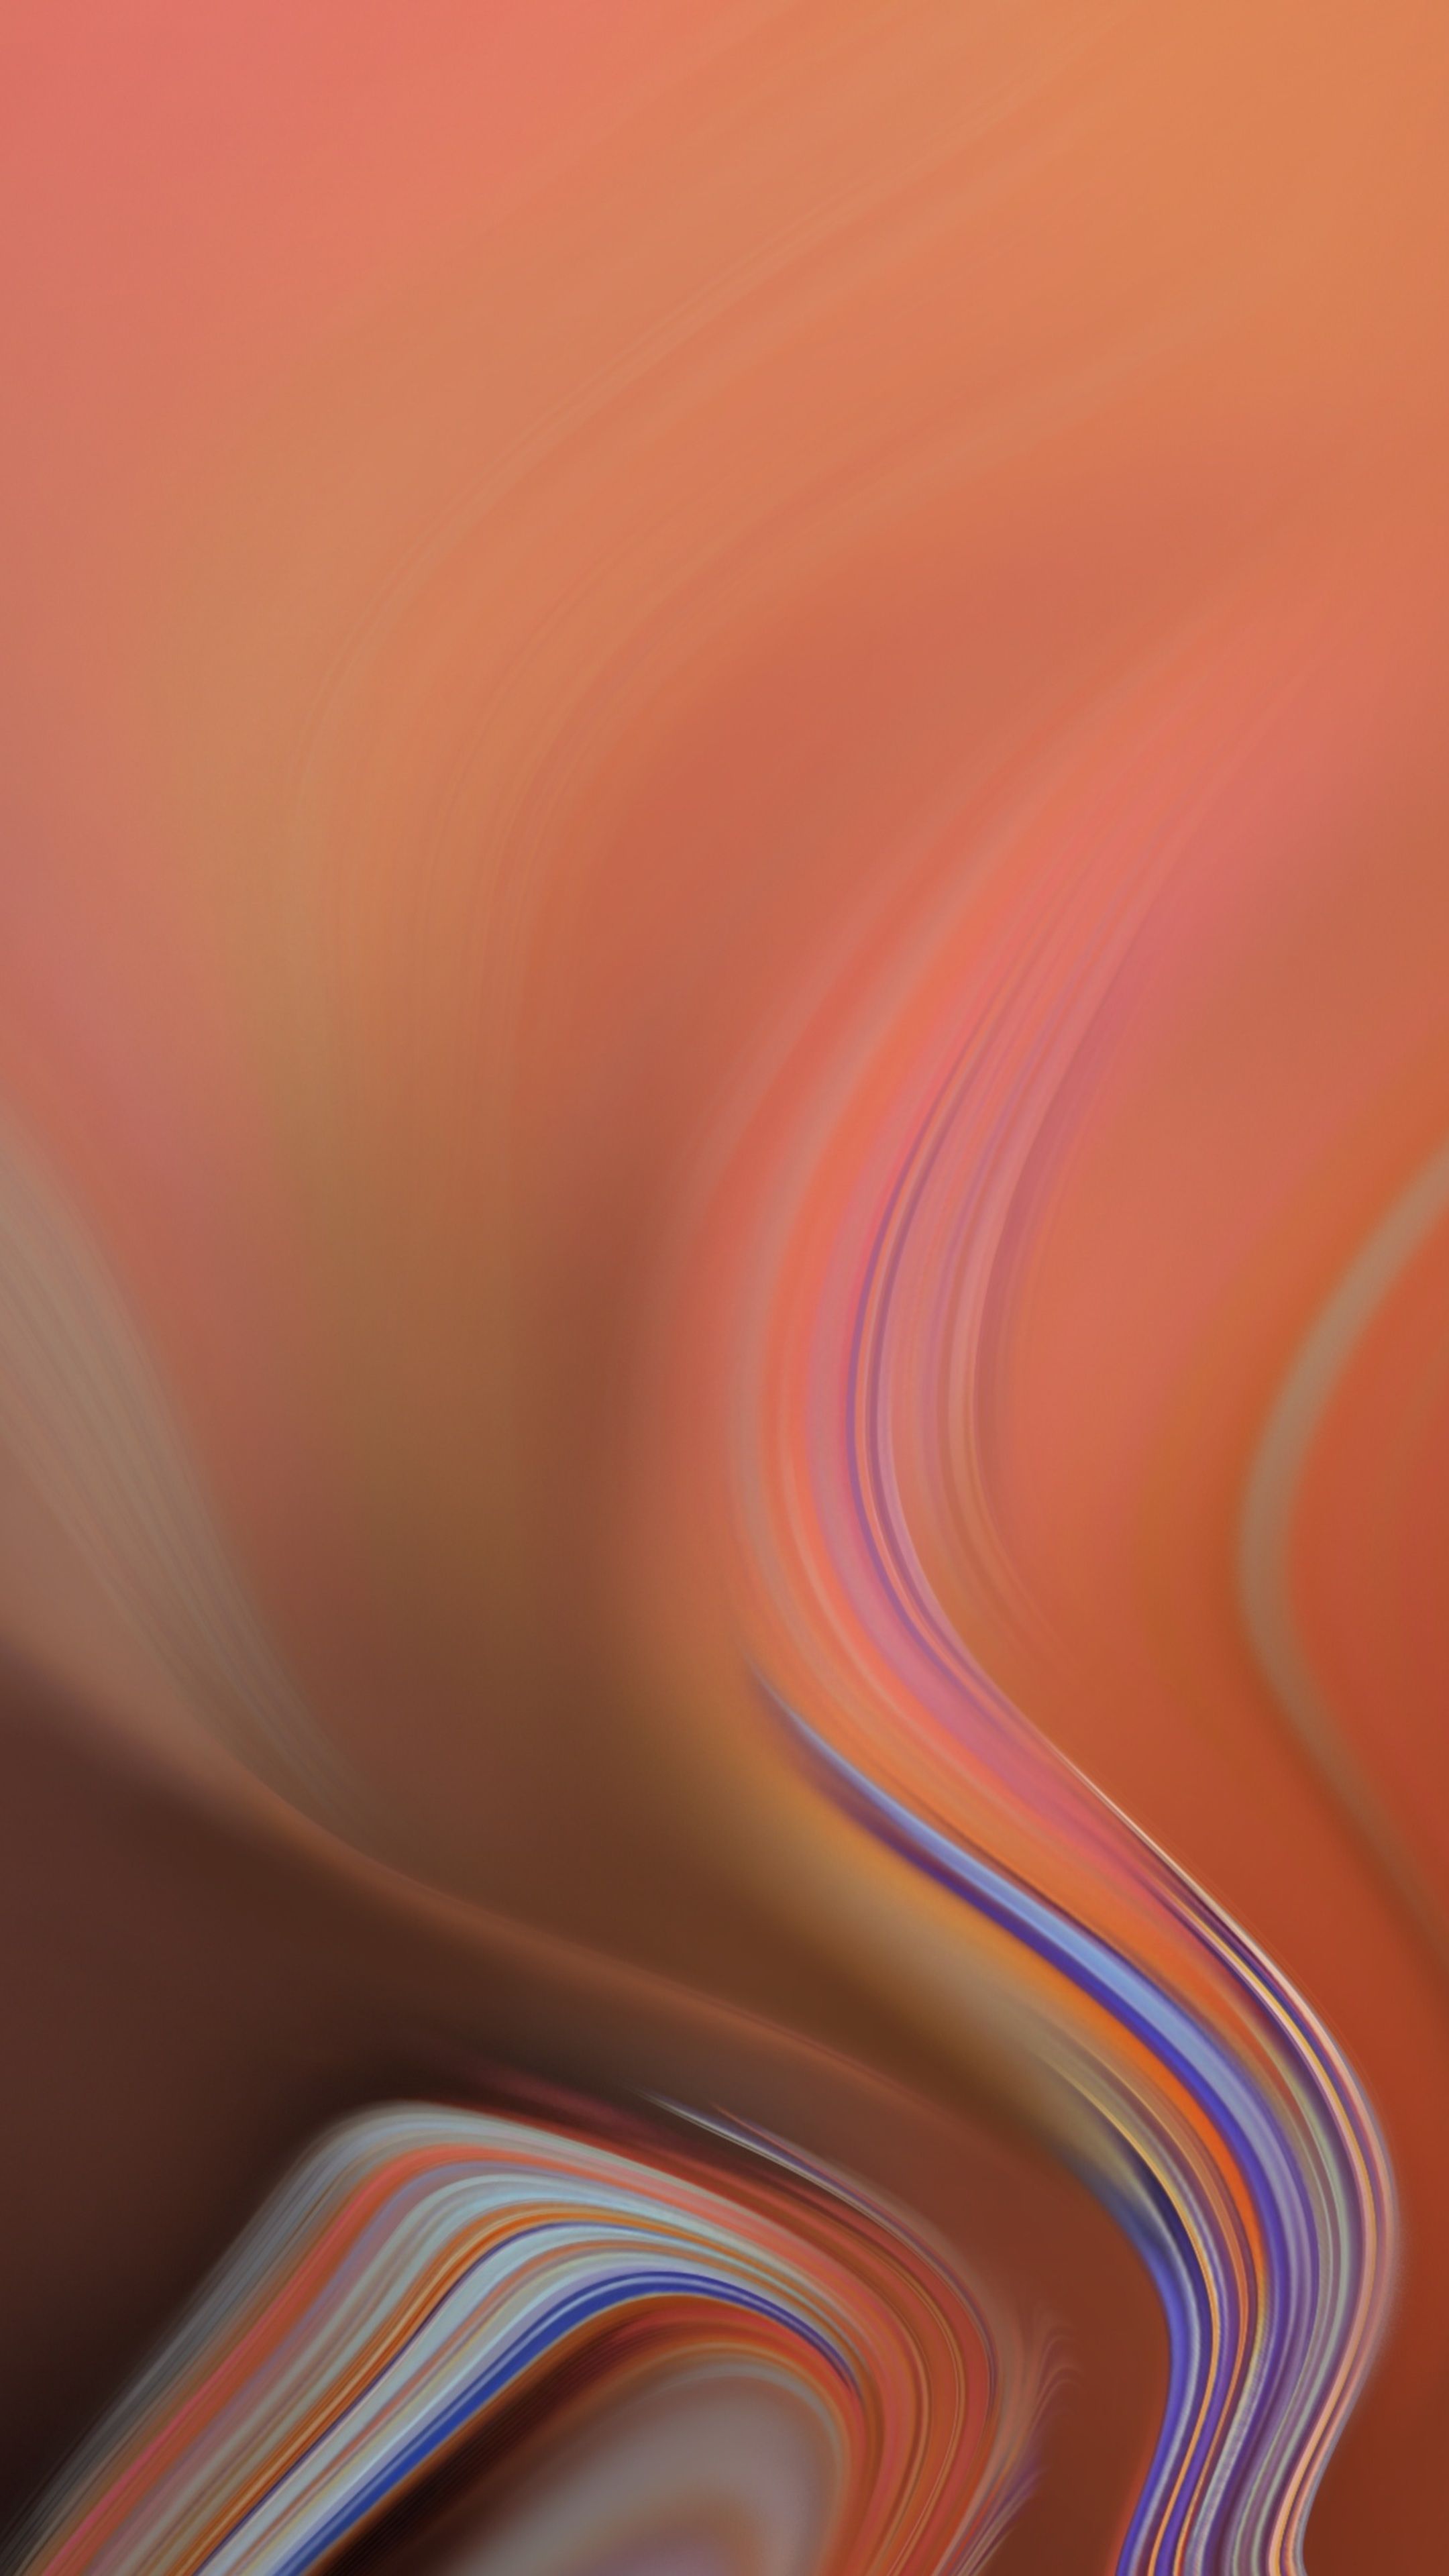 Note 9 Abstract In 2160x3840 Resolution. Abstract wallpaper, Android wallpaper, Abstract